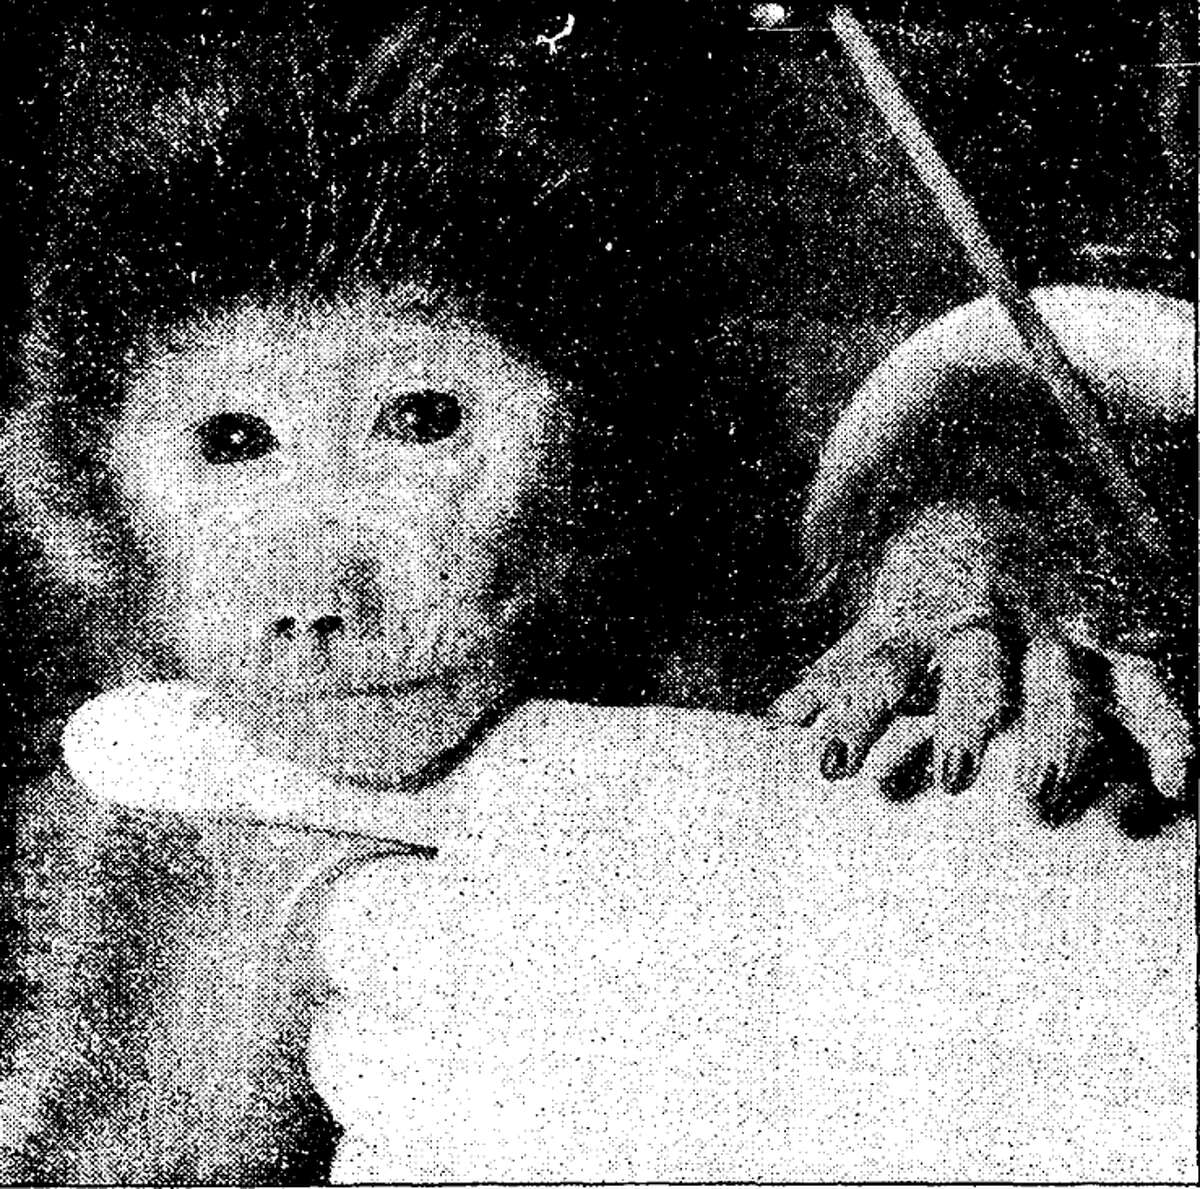 E.T., the world's first test tube primate, was born 38 years ago this week in San Antonio. E.T. was 18 hours old in this photo and was born at the Southwest Foundation for Research and Education. 